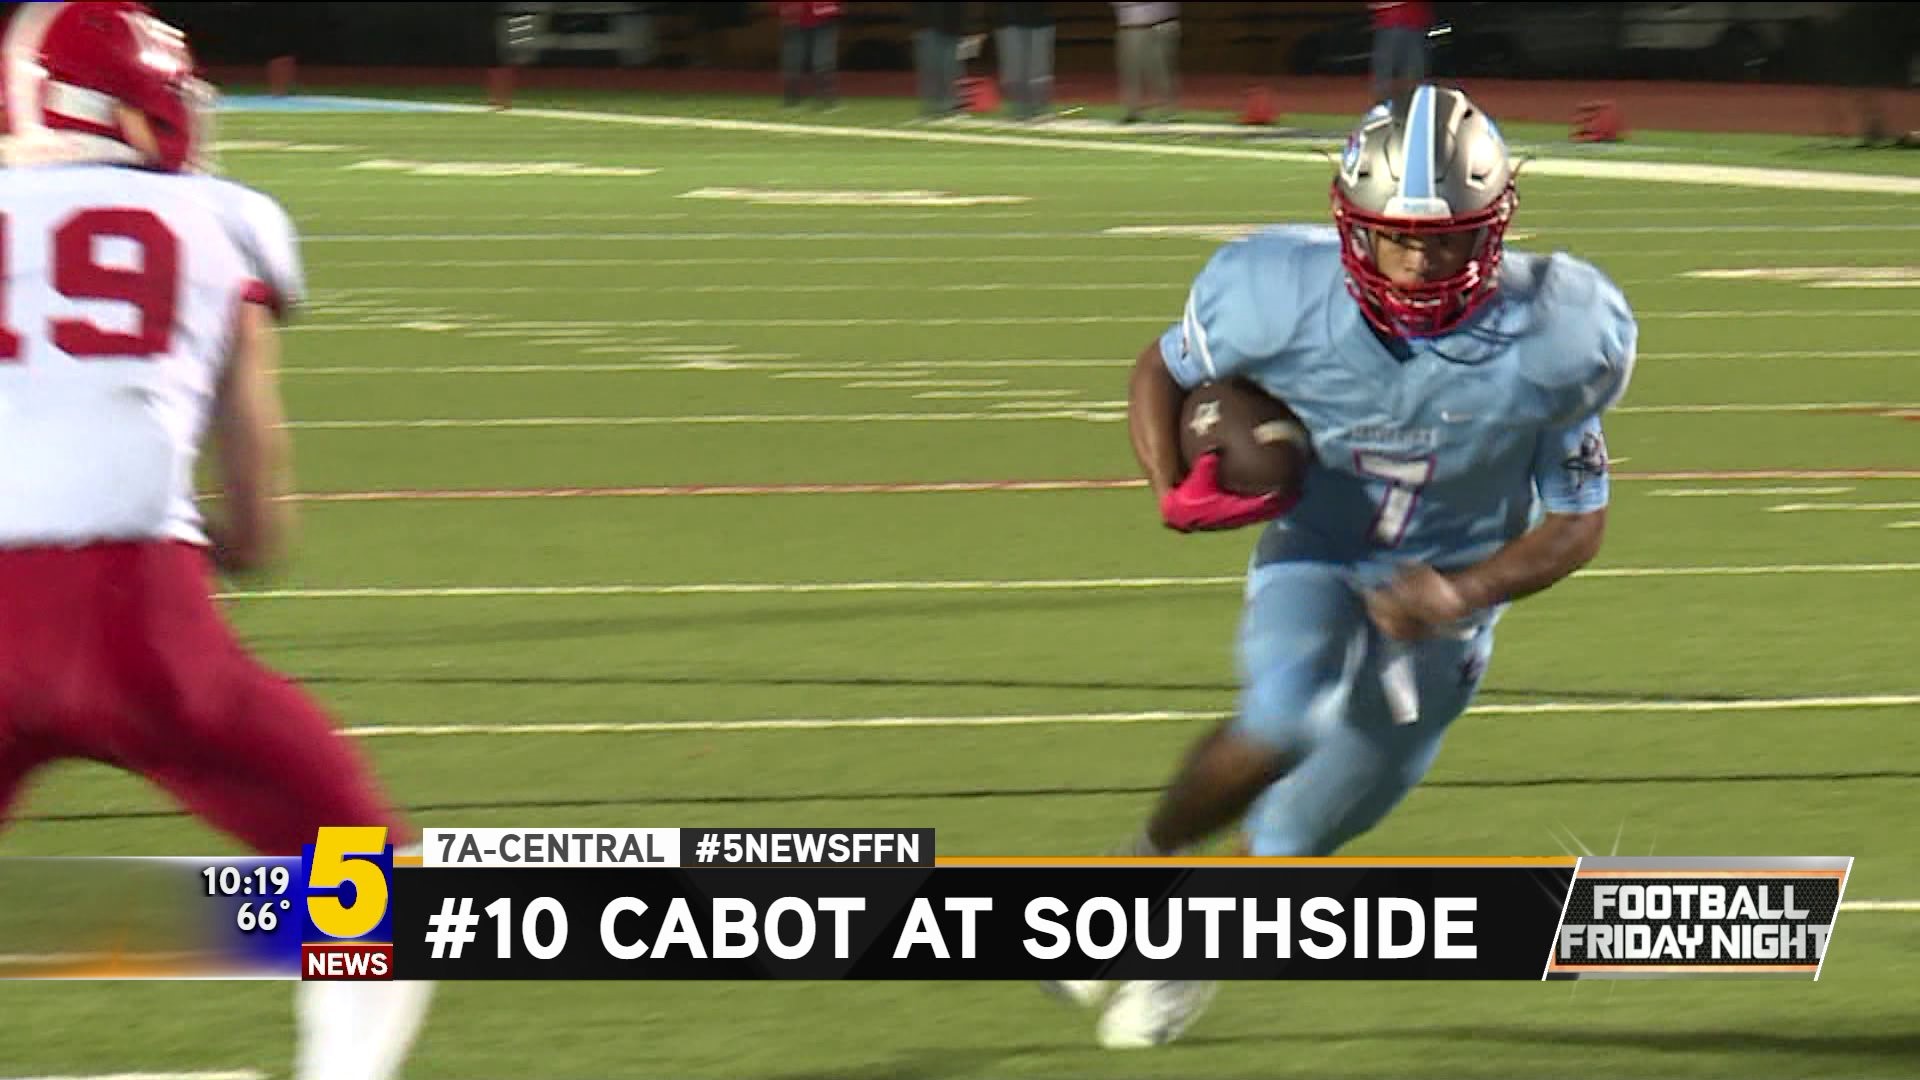 Cabot at Southside